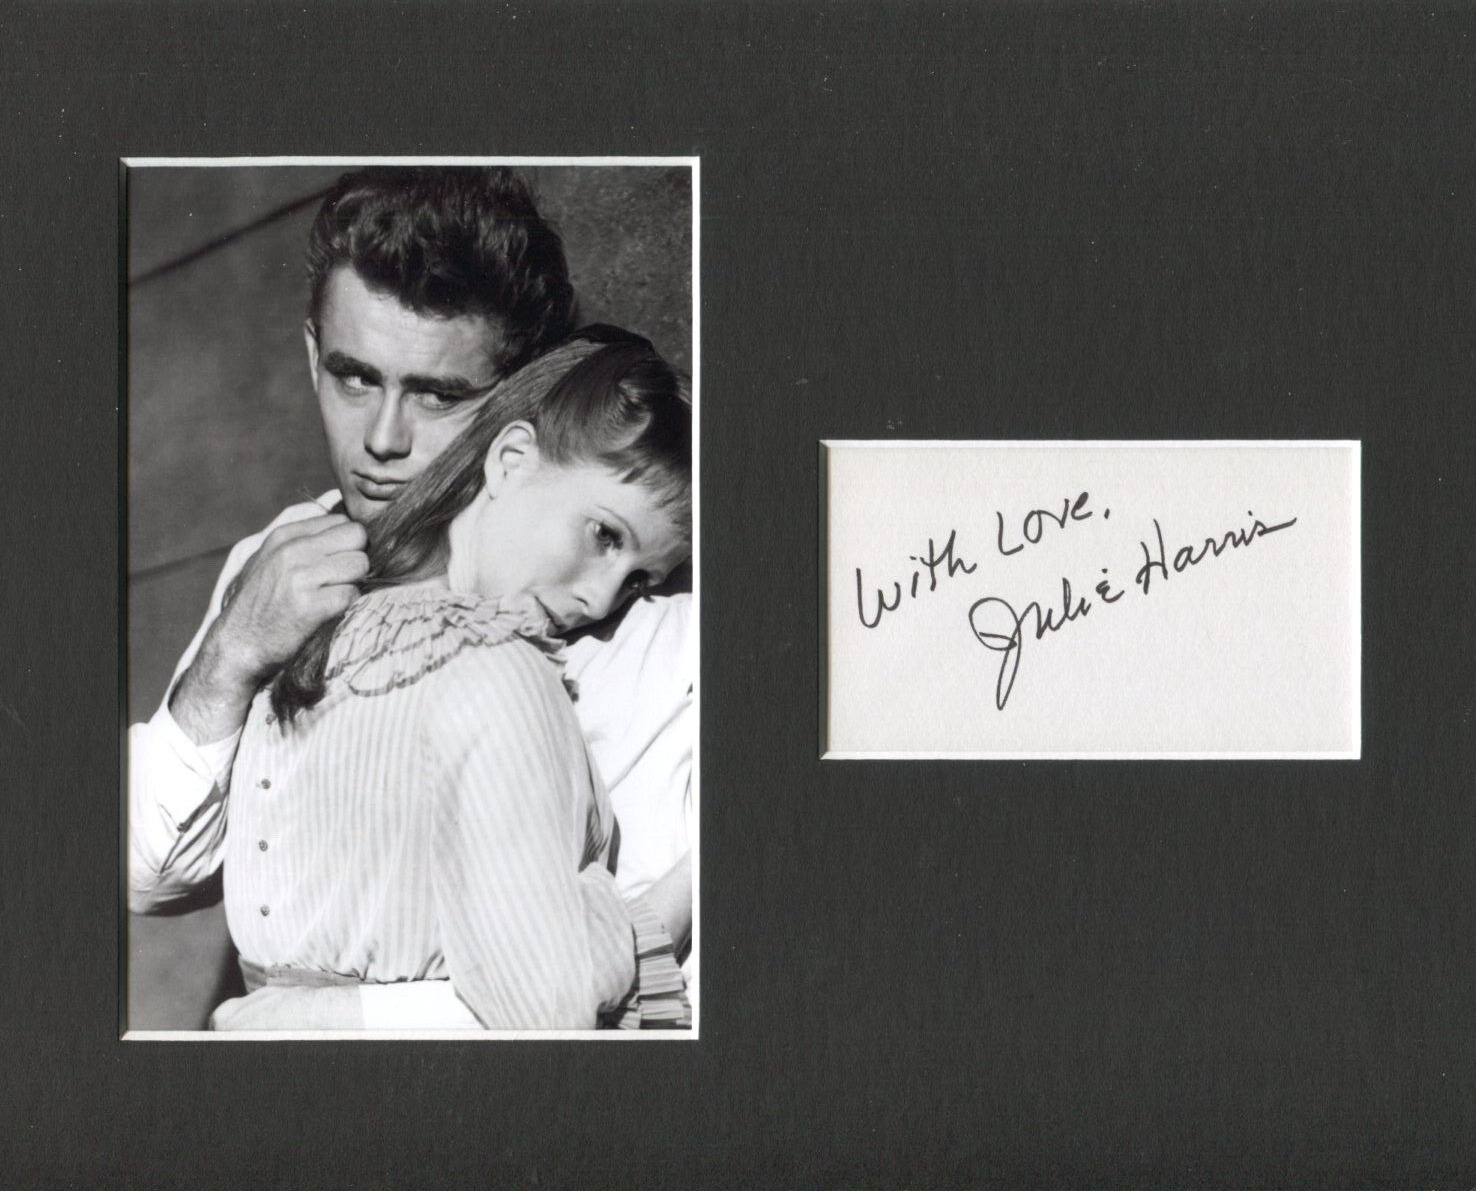 Julie Harris East Of Eden Signed Autograph Photo Display With James Dean